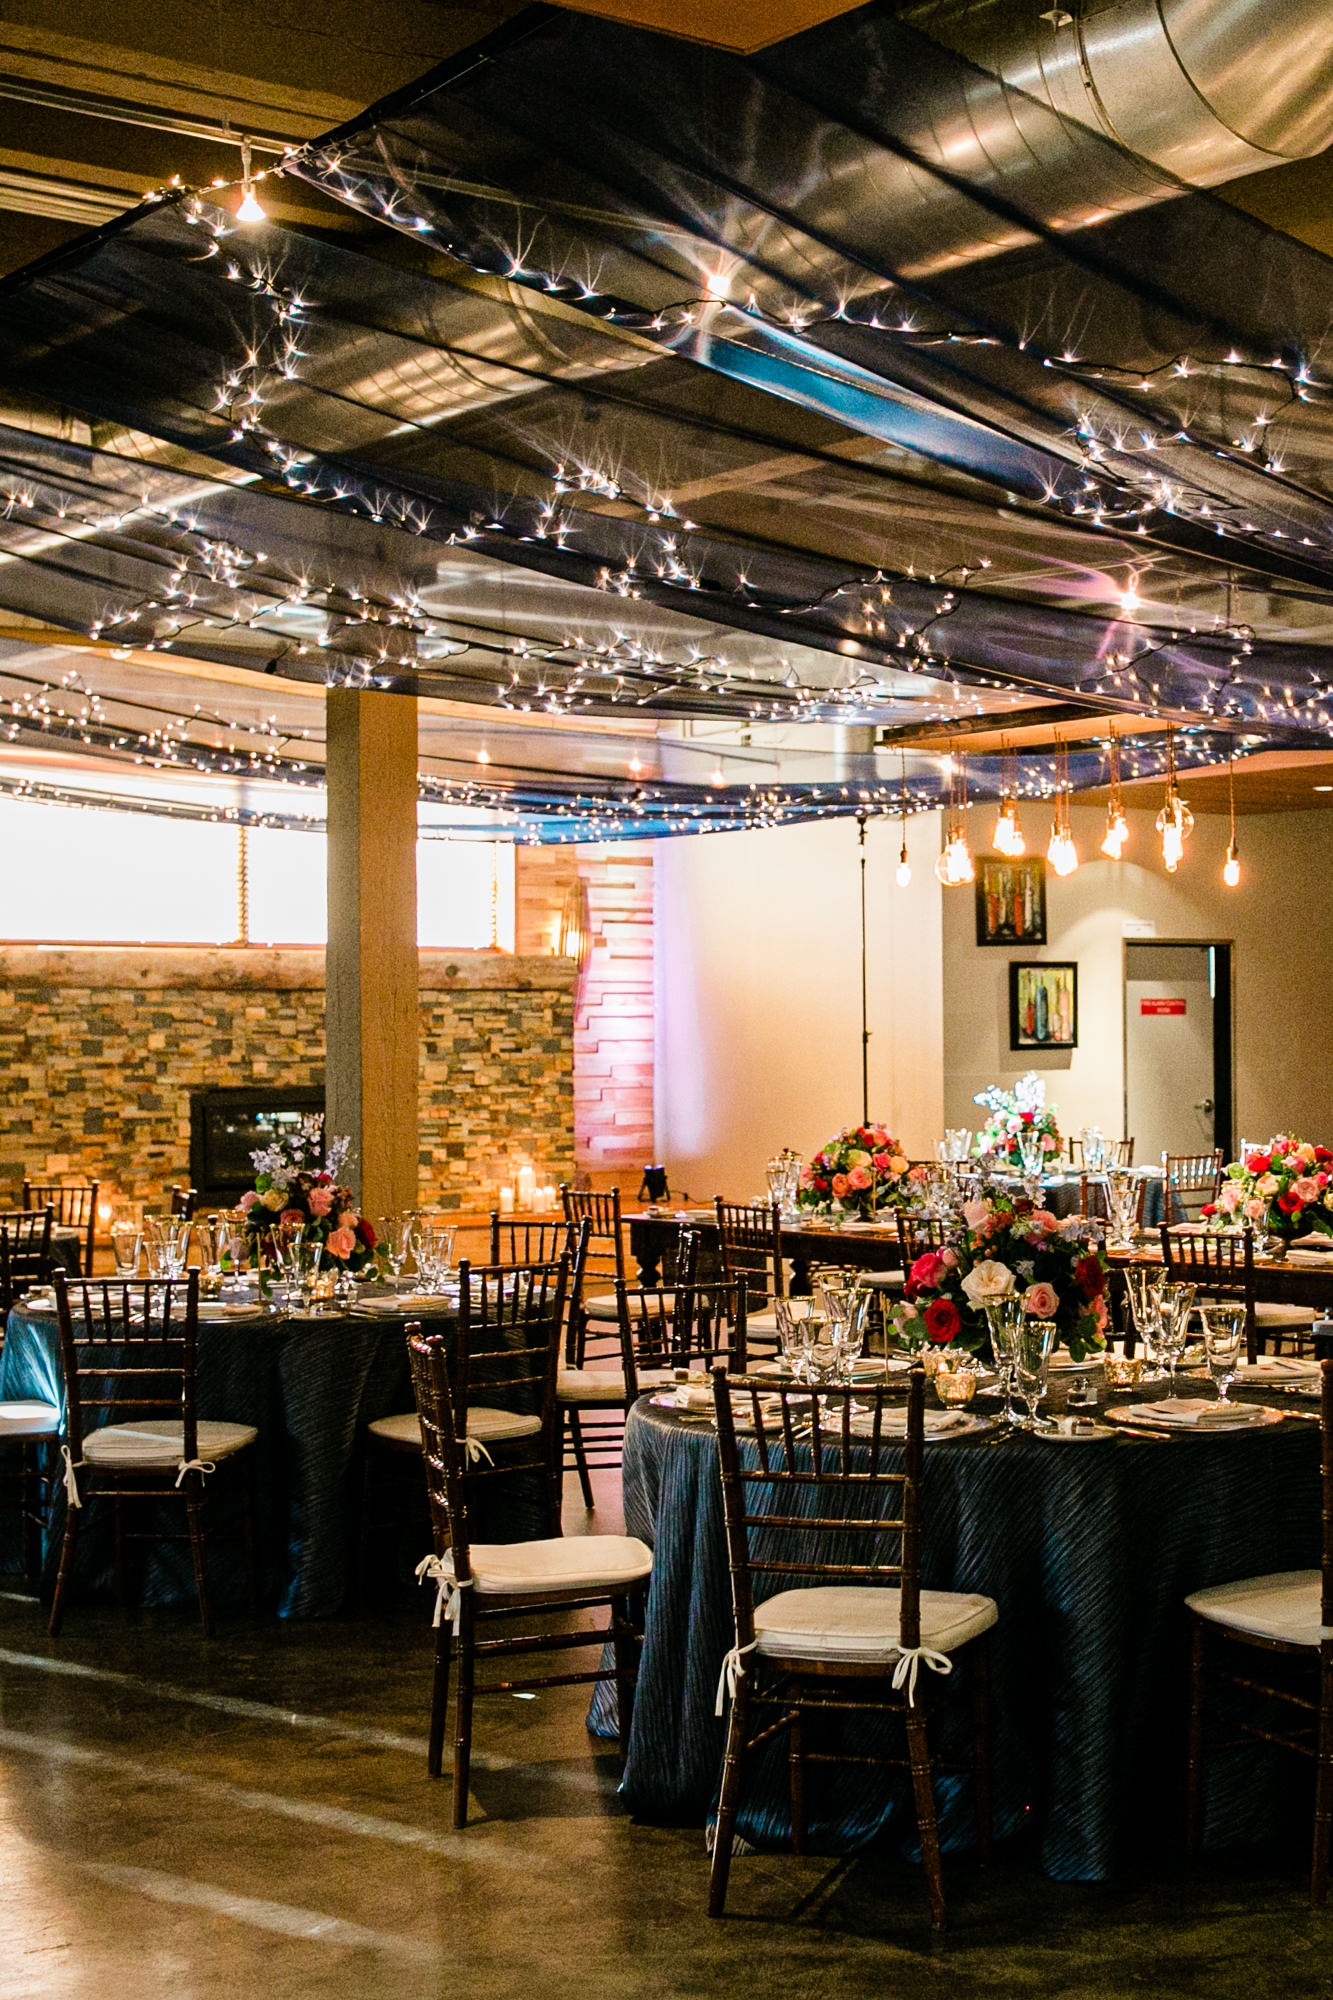 Such a beautiful wedding reception setup at The Foundry by Herban Feast